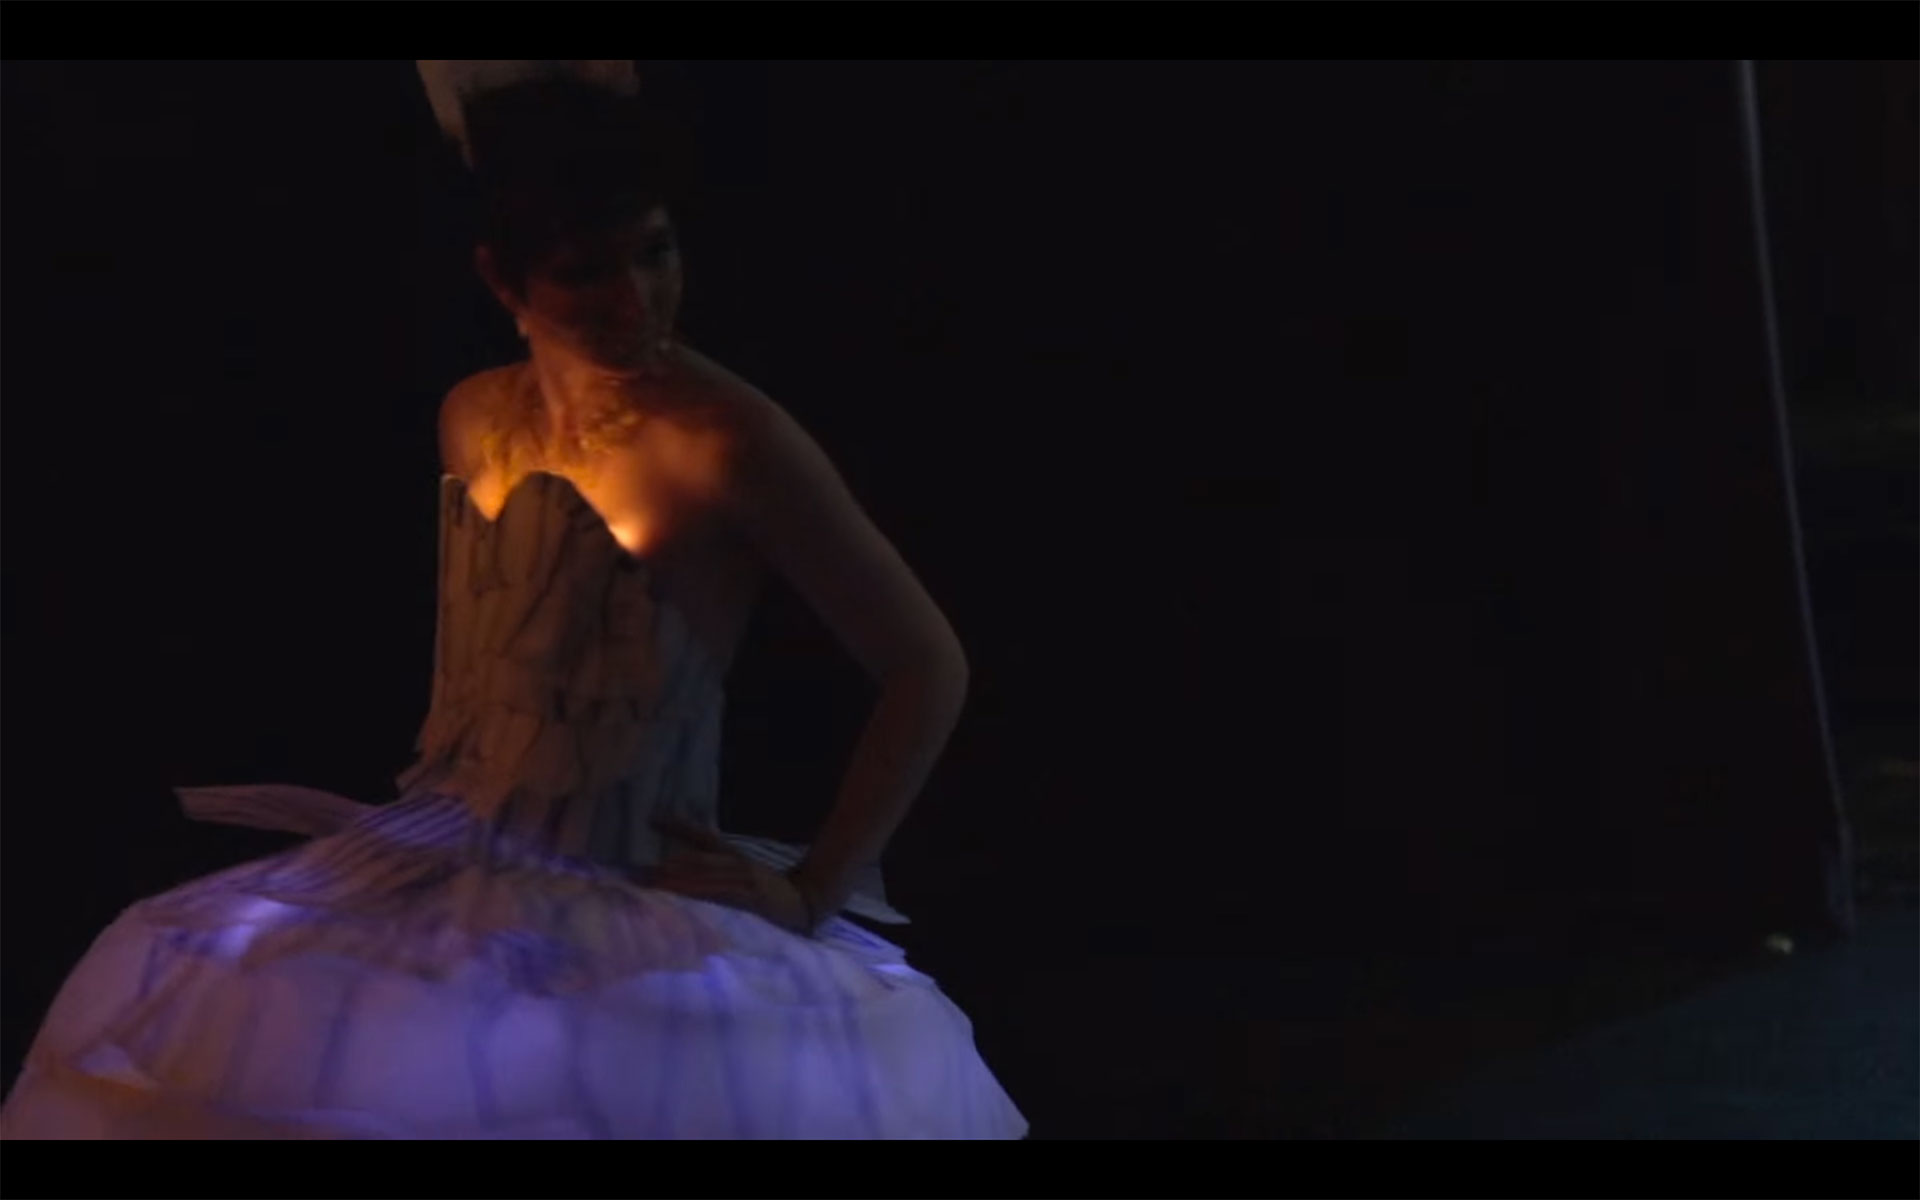 very dark scene. a figure in a poofy white dress is illuminated dimly by lights within the dress.